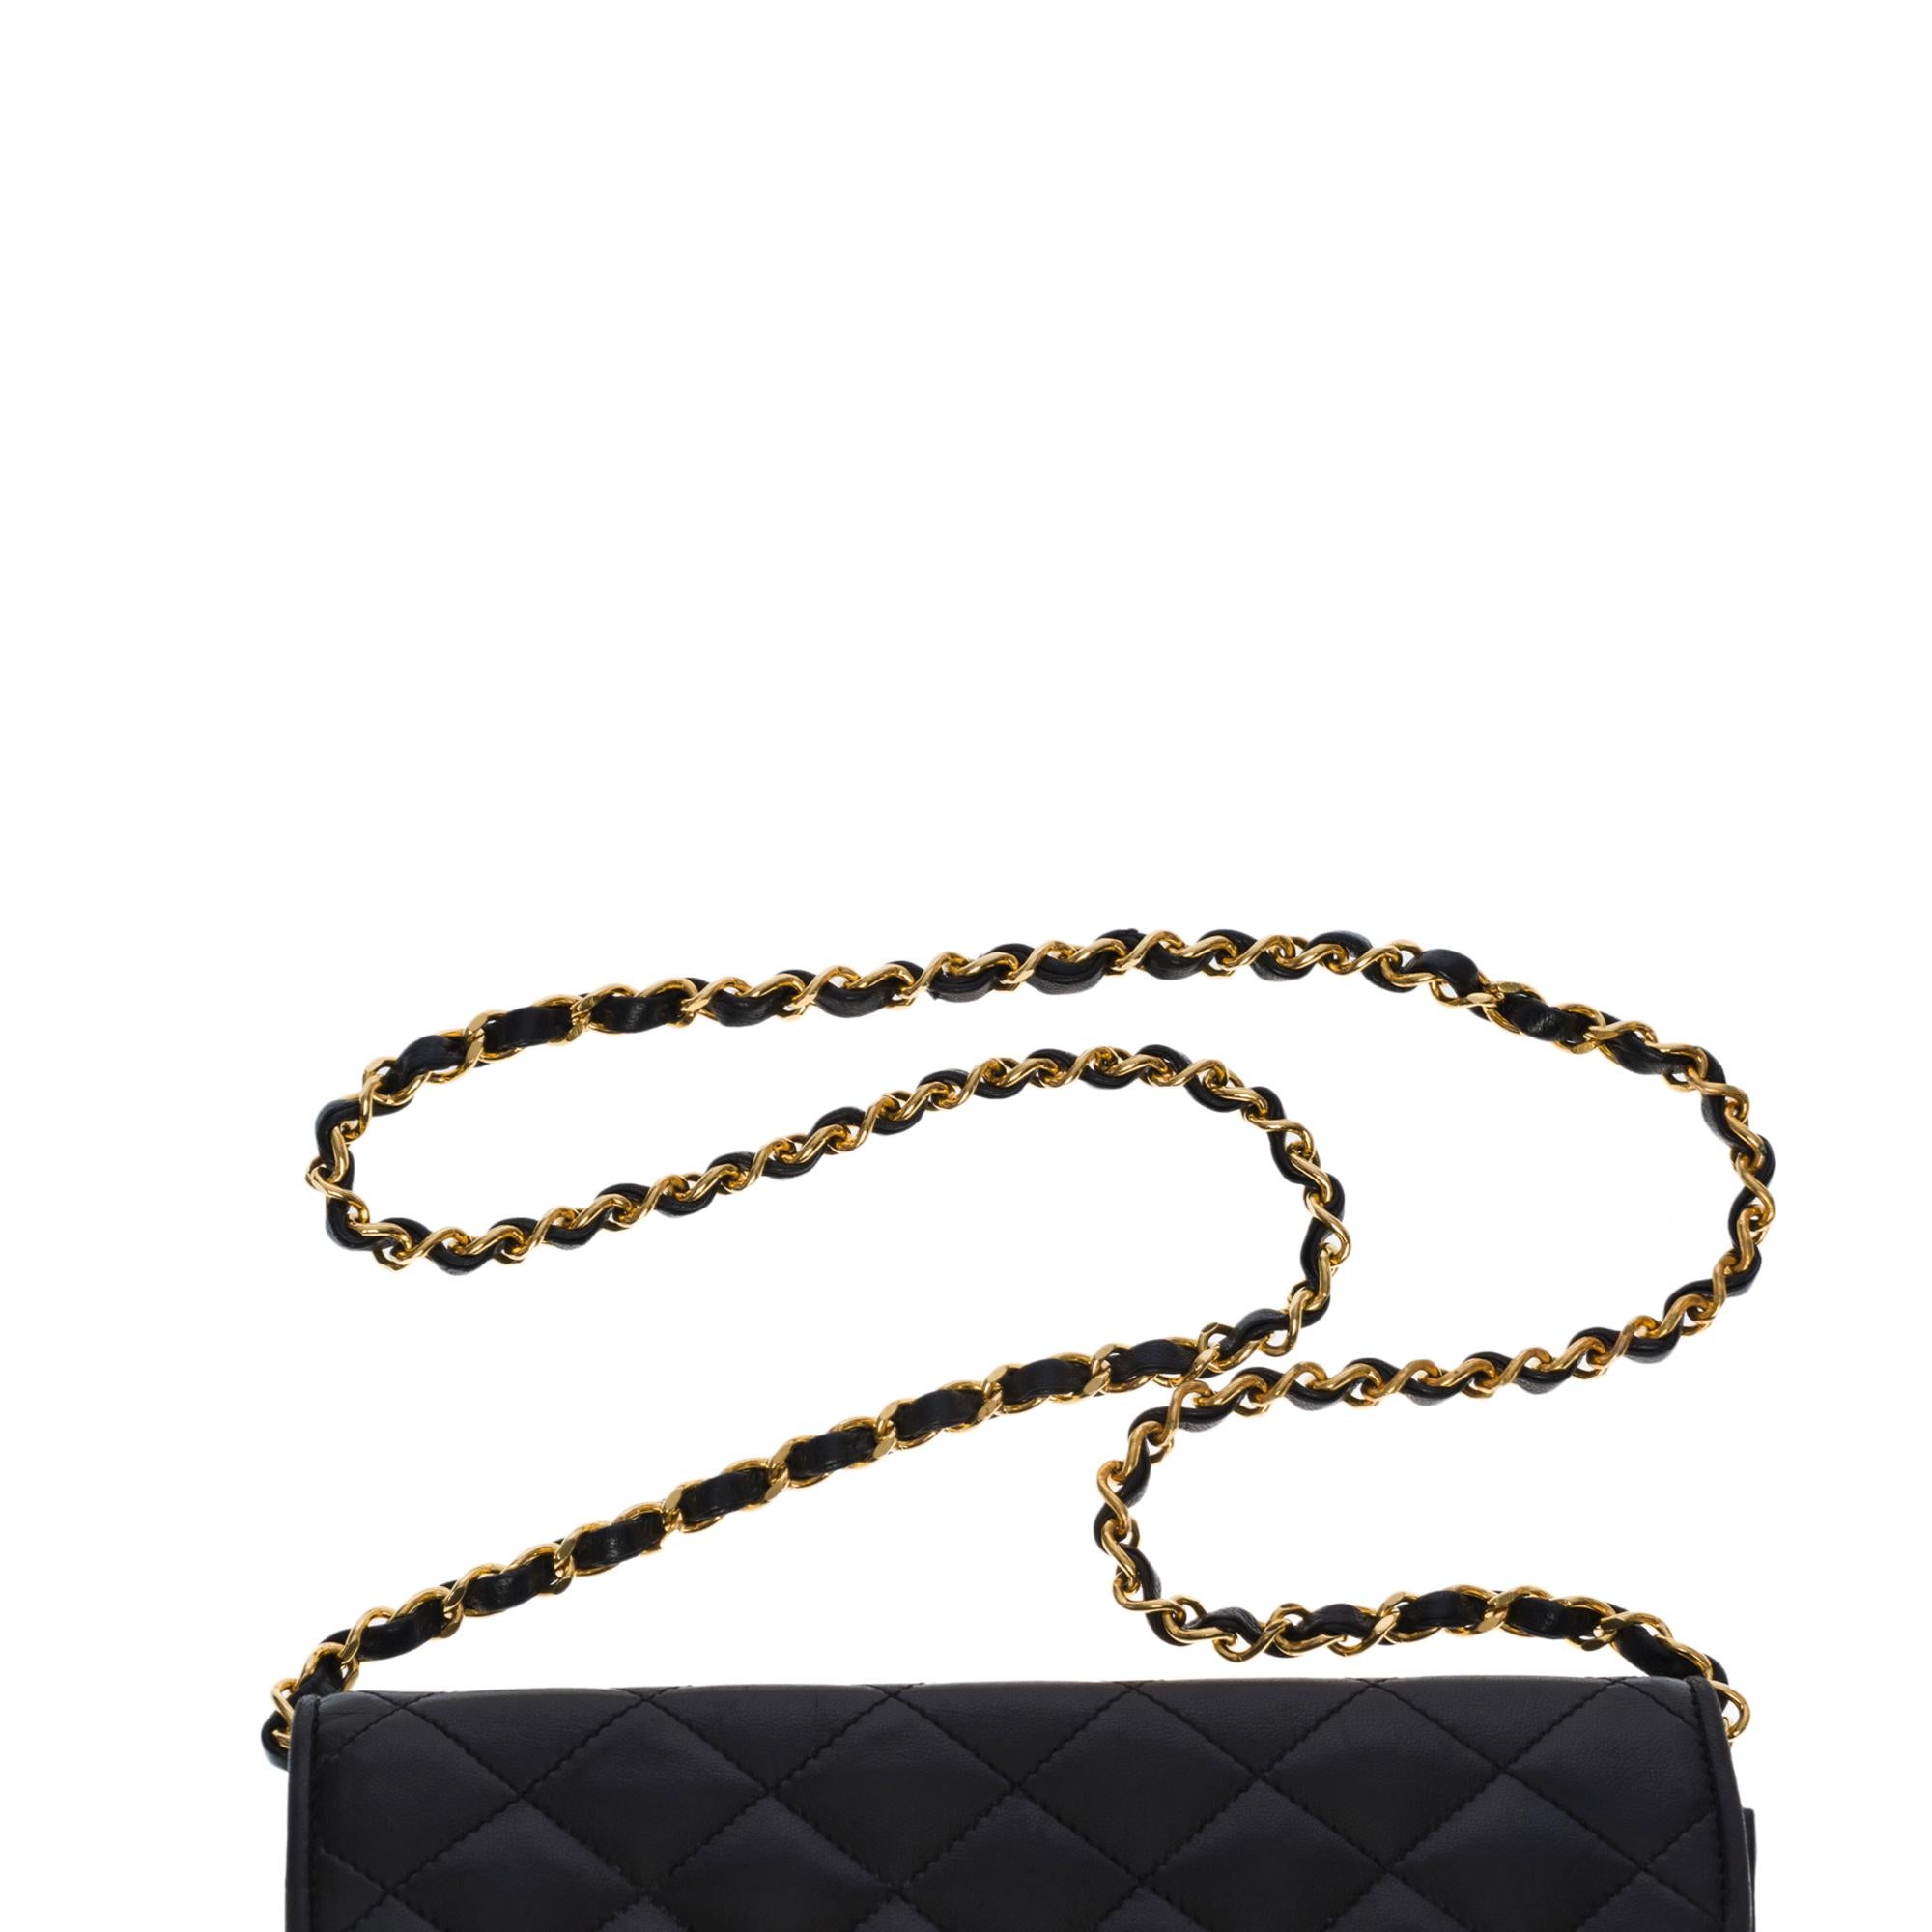 Rare Chanel Classic Flap shoulder bag in black quilted lambskin, GHW 2